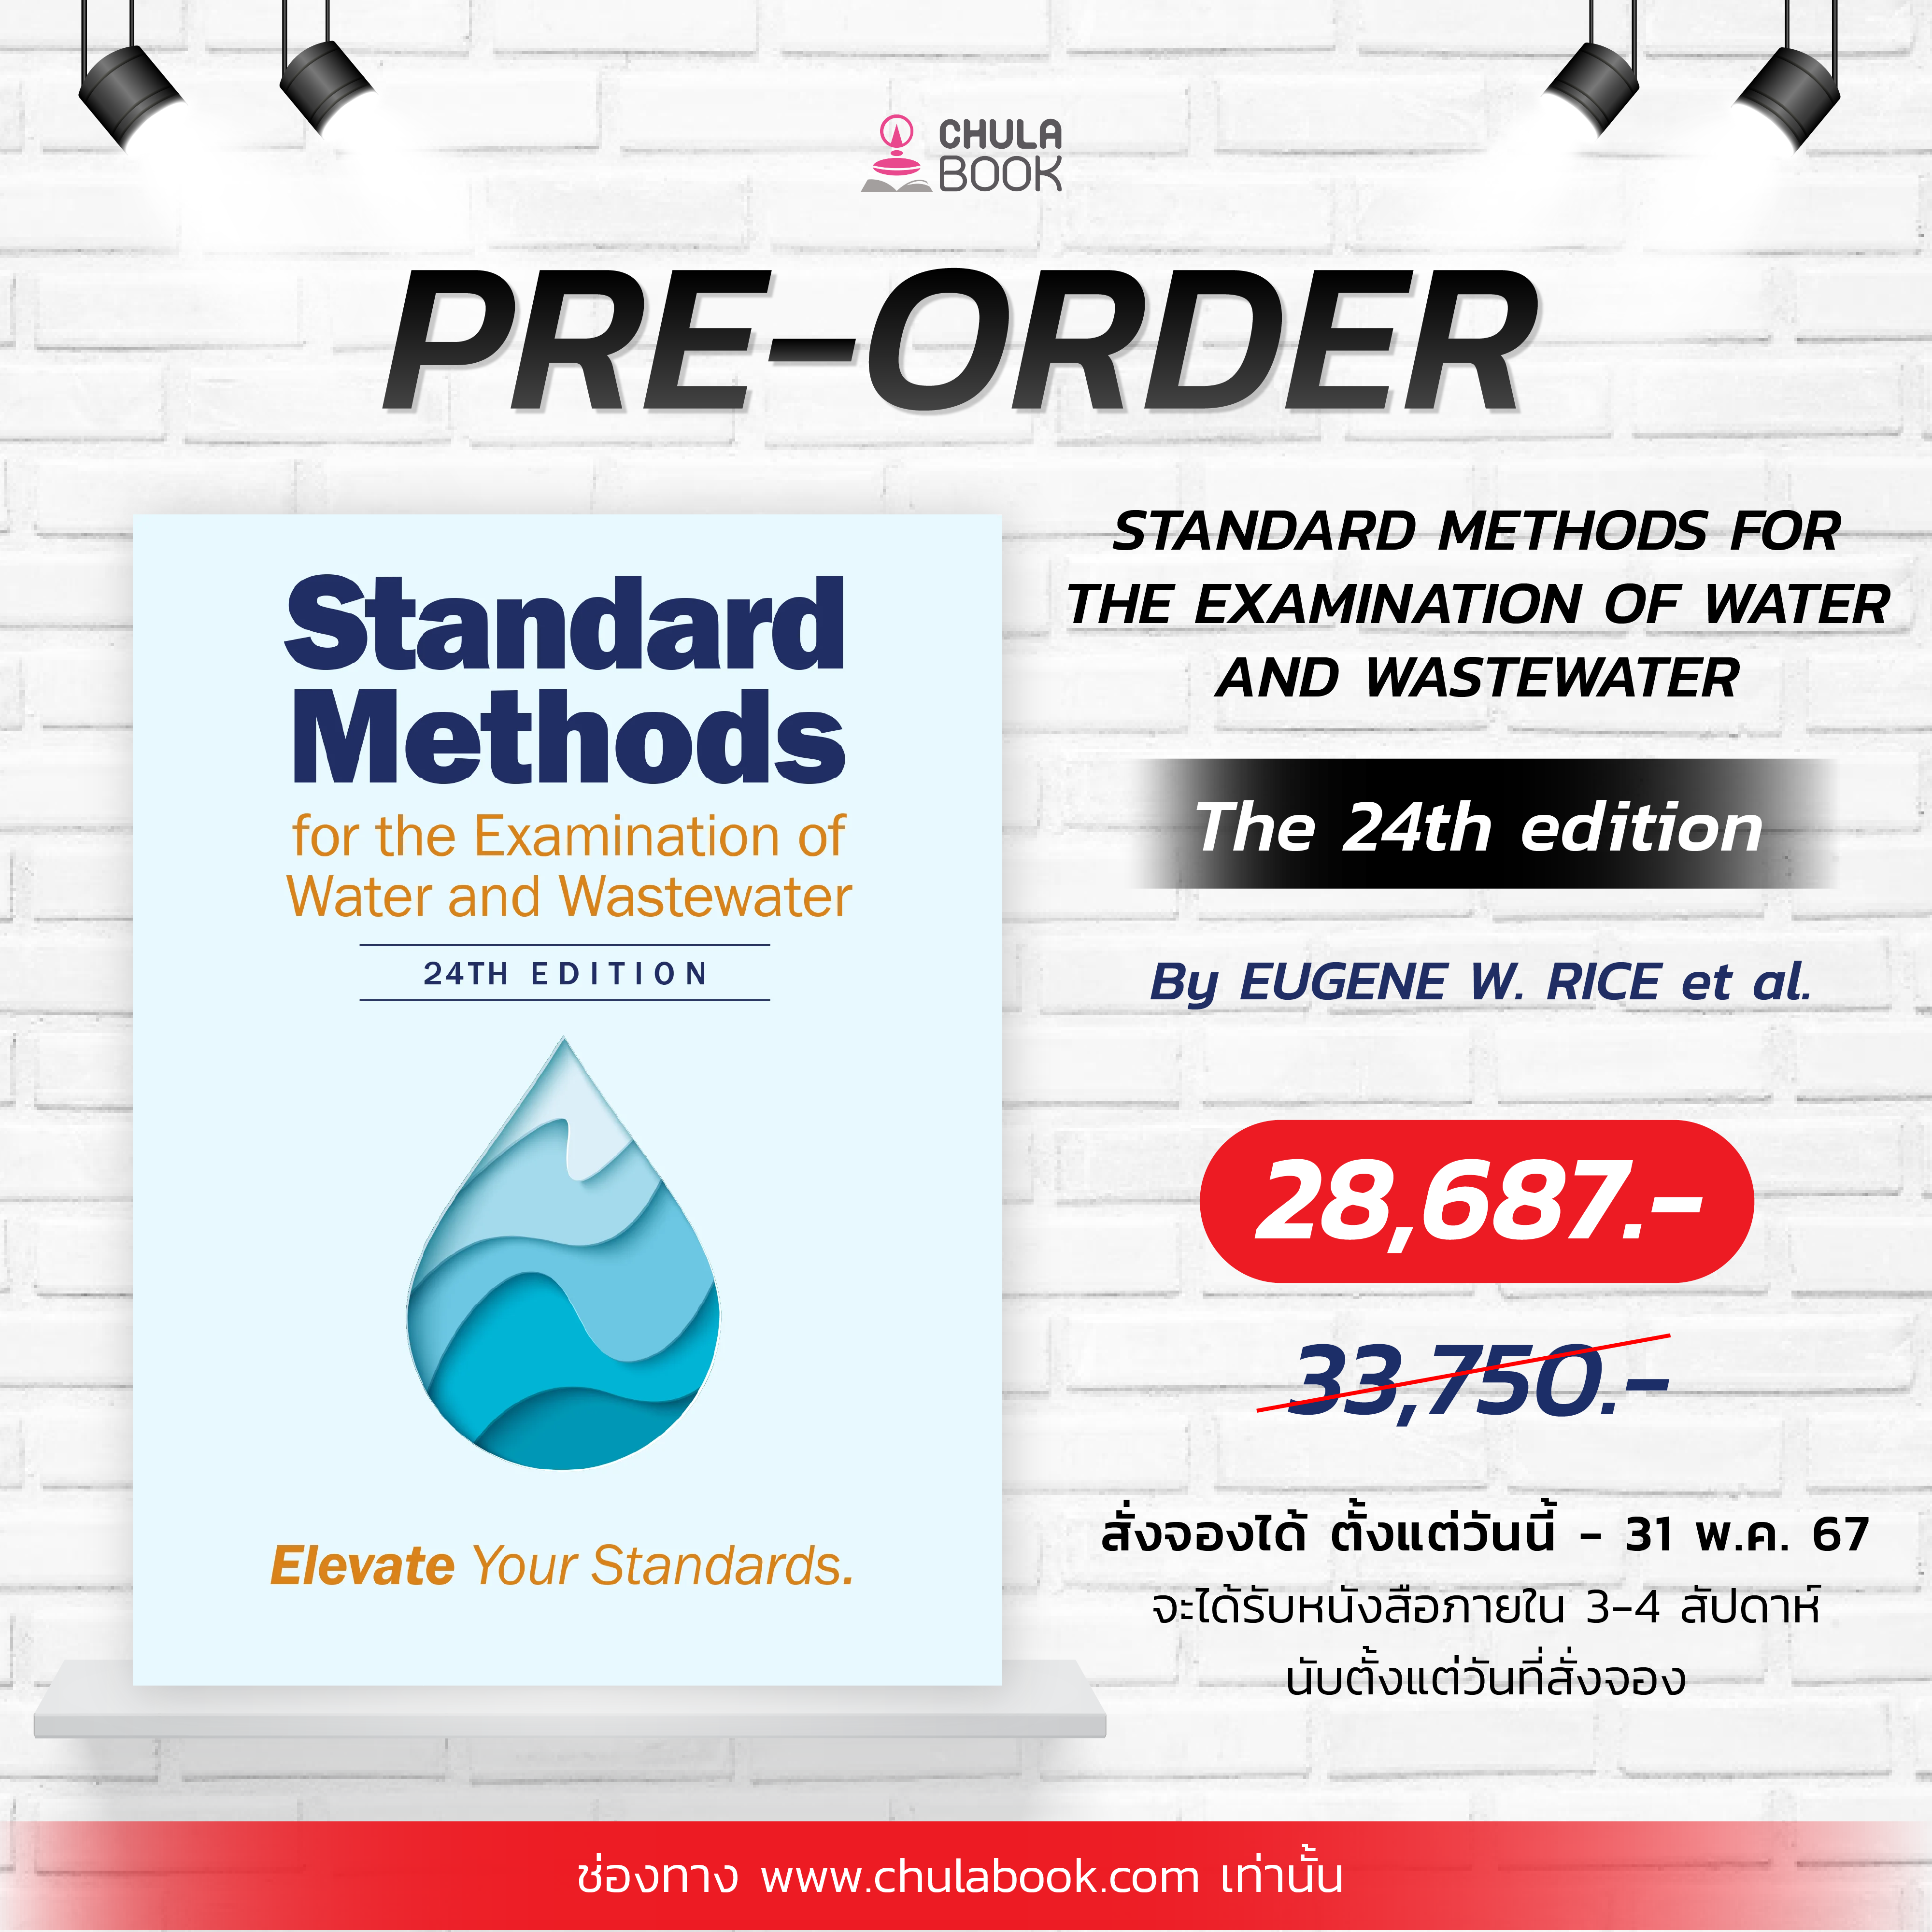 Pre-Order STANDARD METHODS FOR THE EXAMINATION OF WATER AND WASTEWATER